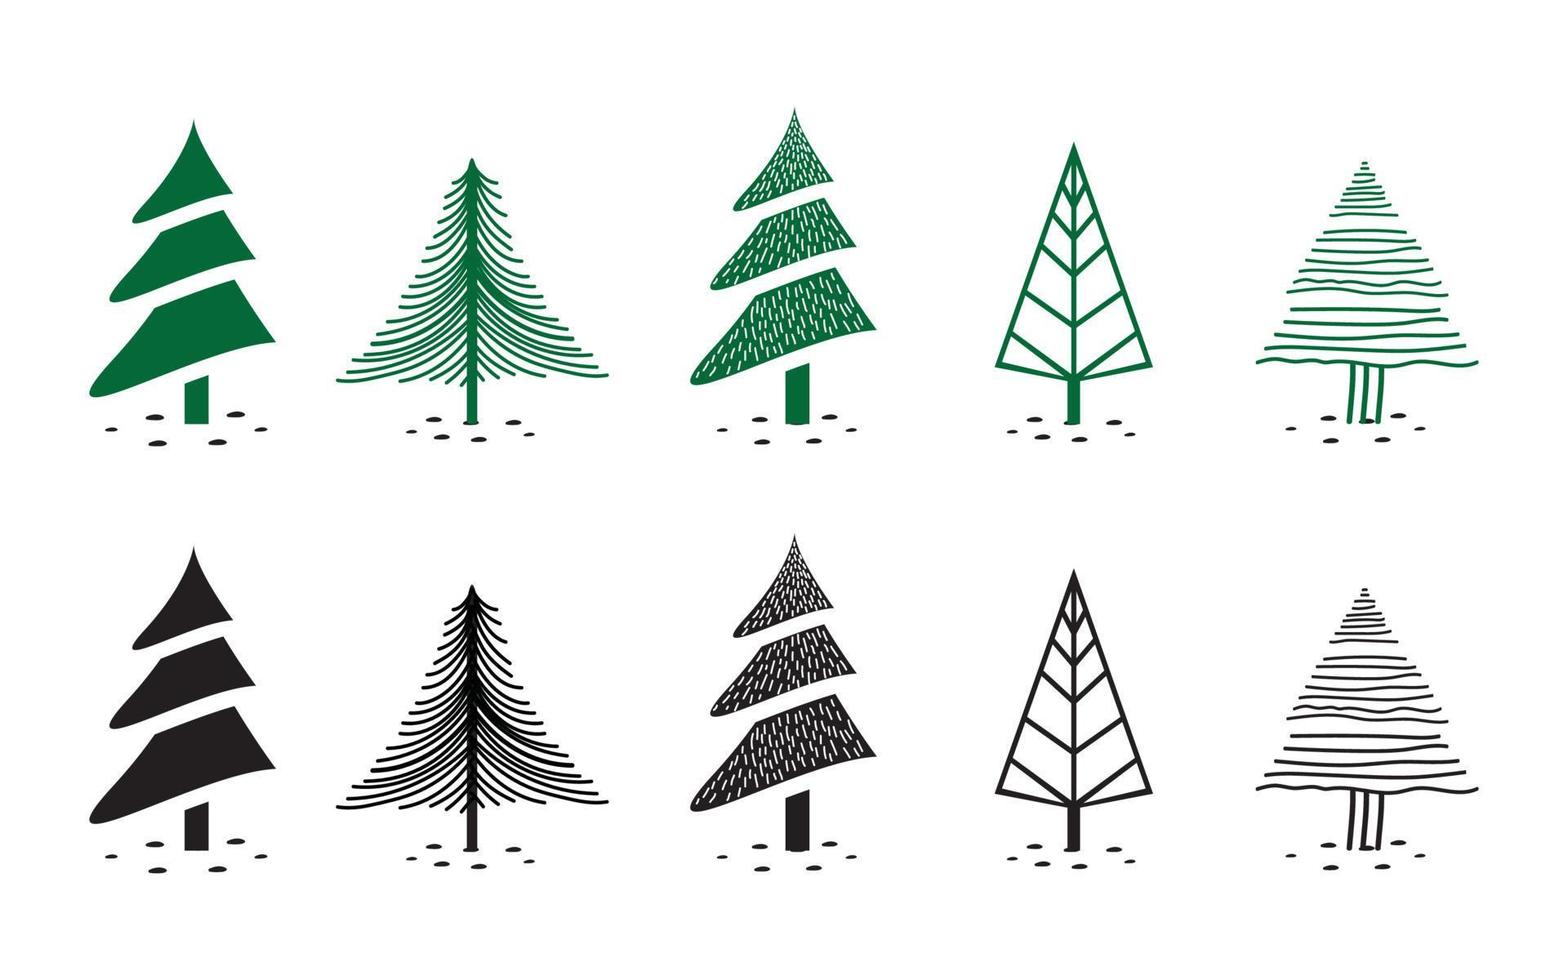 Christmas tree illustration set - various tree shapes in a hand-drawn style. vector